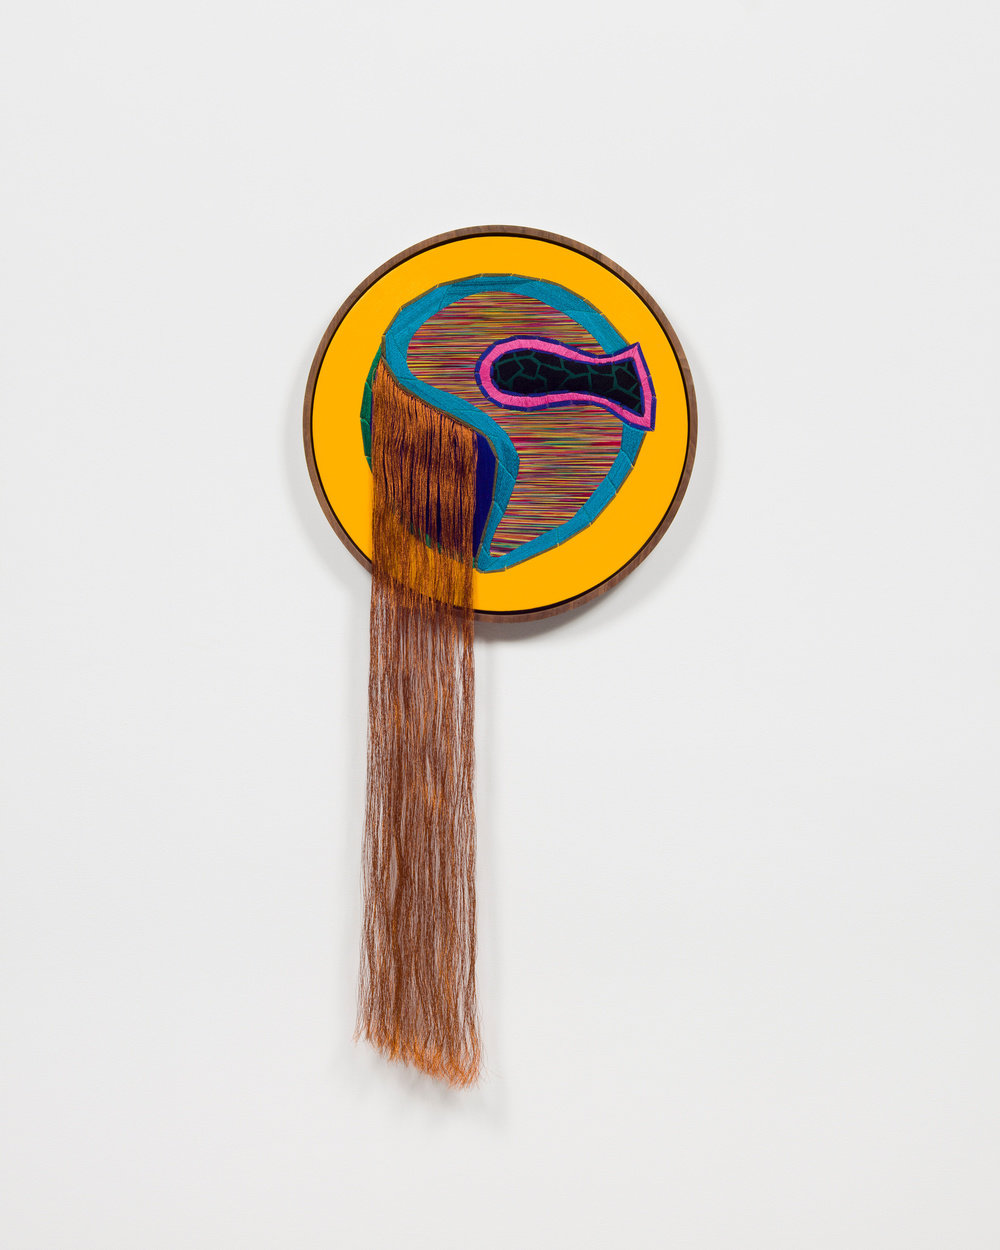 Cox, memory gongs, 2016, thread, fabric, poly stuffing, acrylic on canvas in oak frame, diameter 24 in., 60.96 cm, cnon 58.476